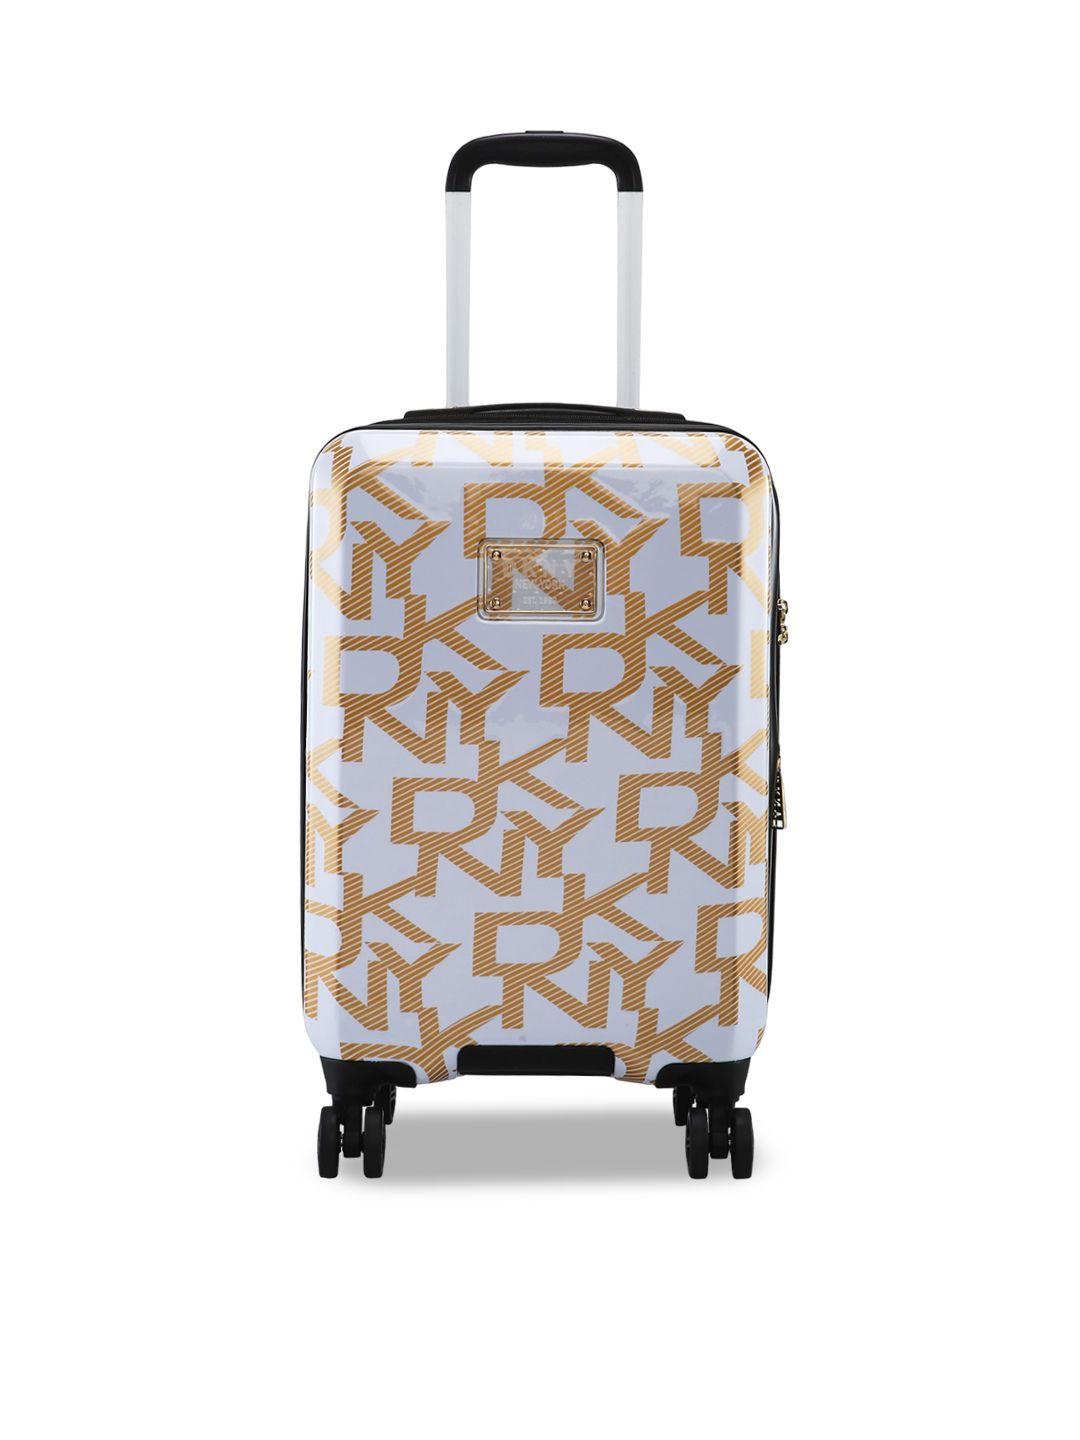 DKNY DECO SIGNATURE Printed Hard-Sided Cabin Trolley Suitcase